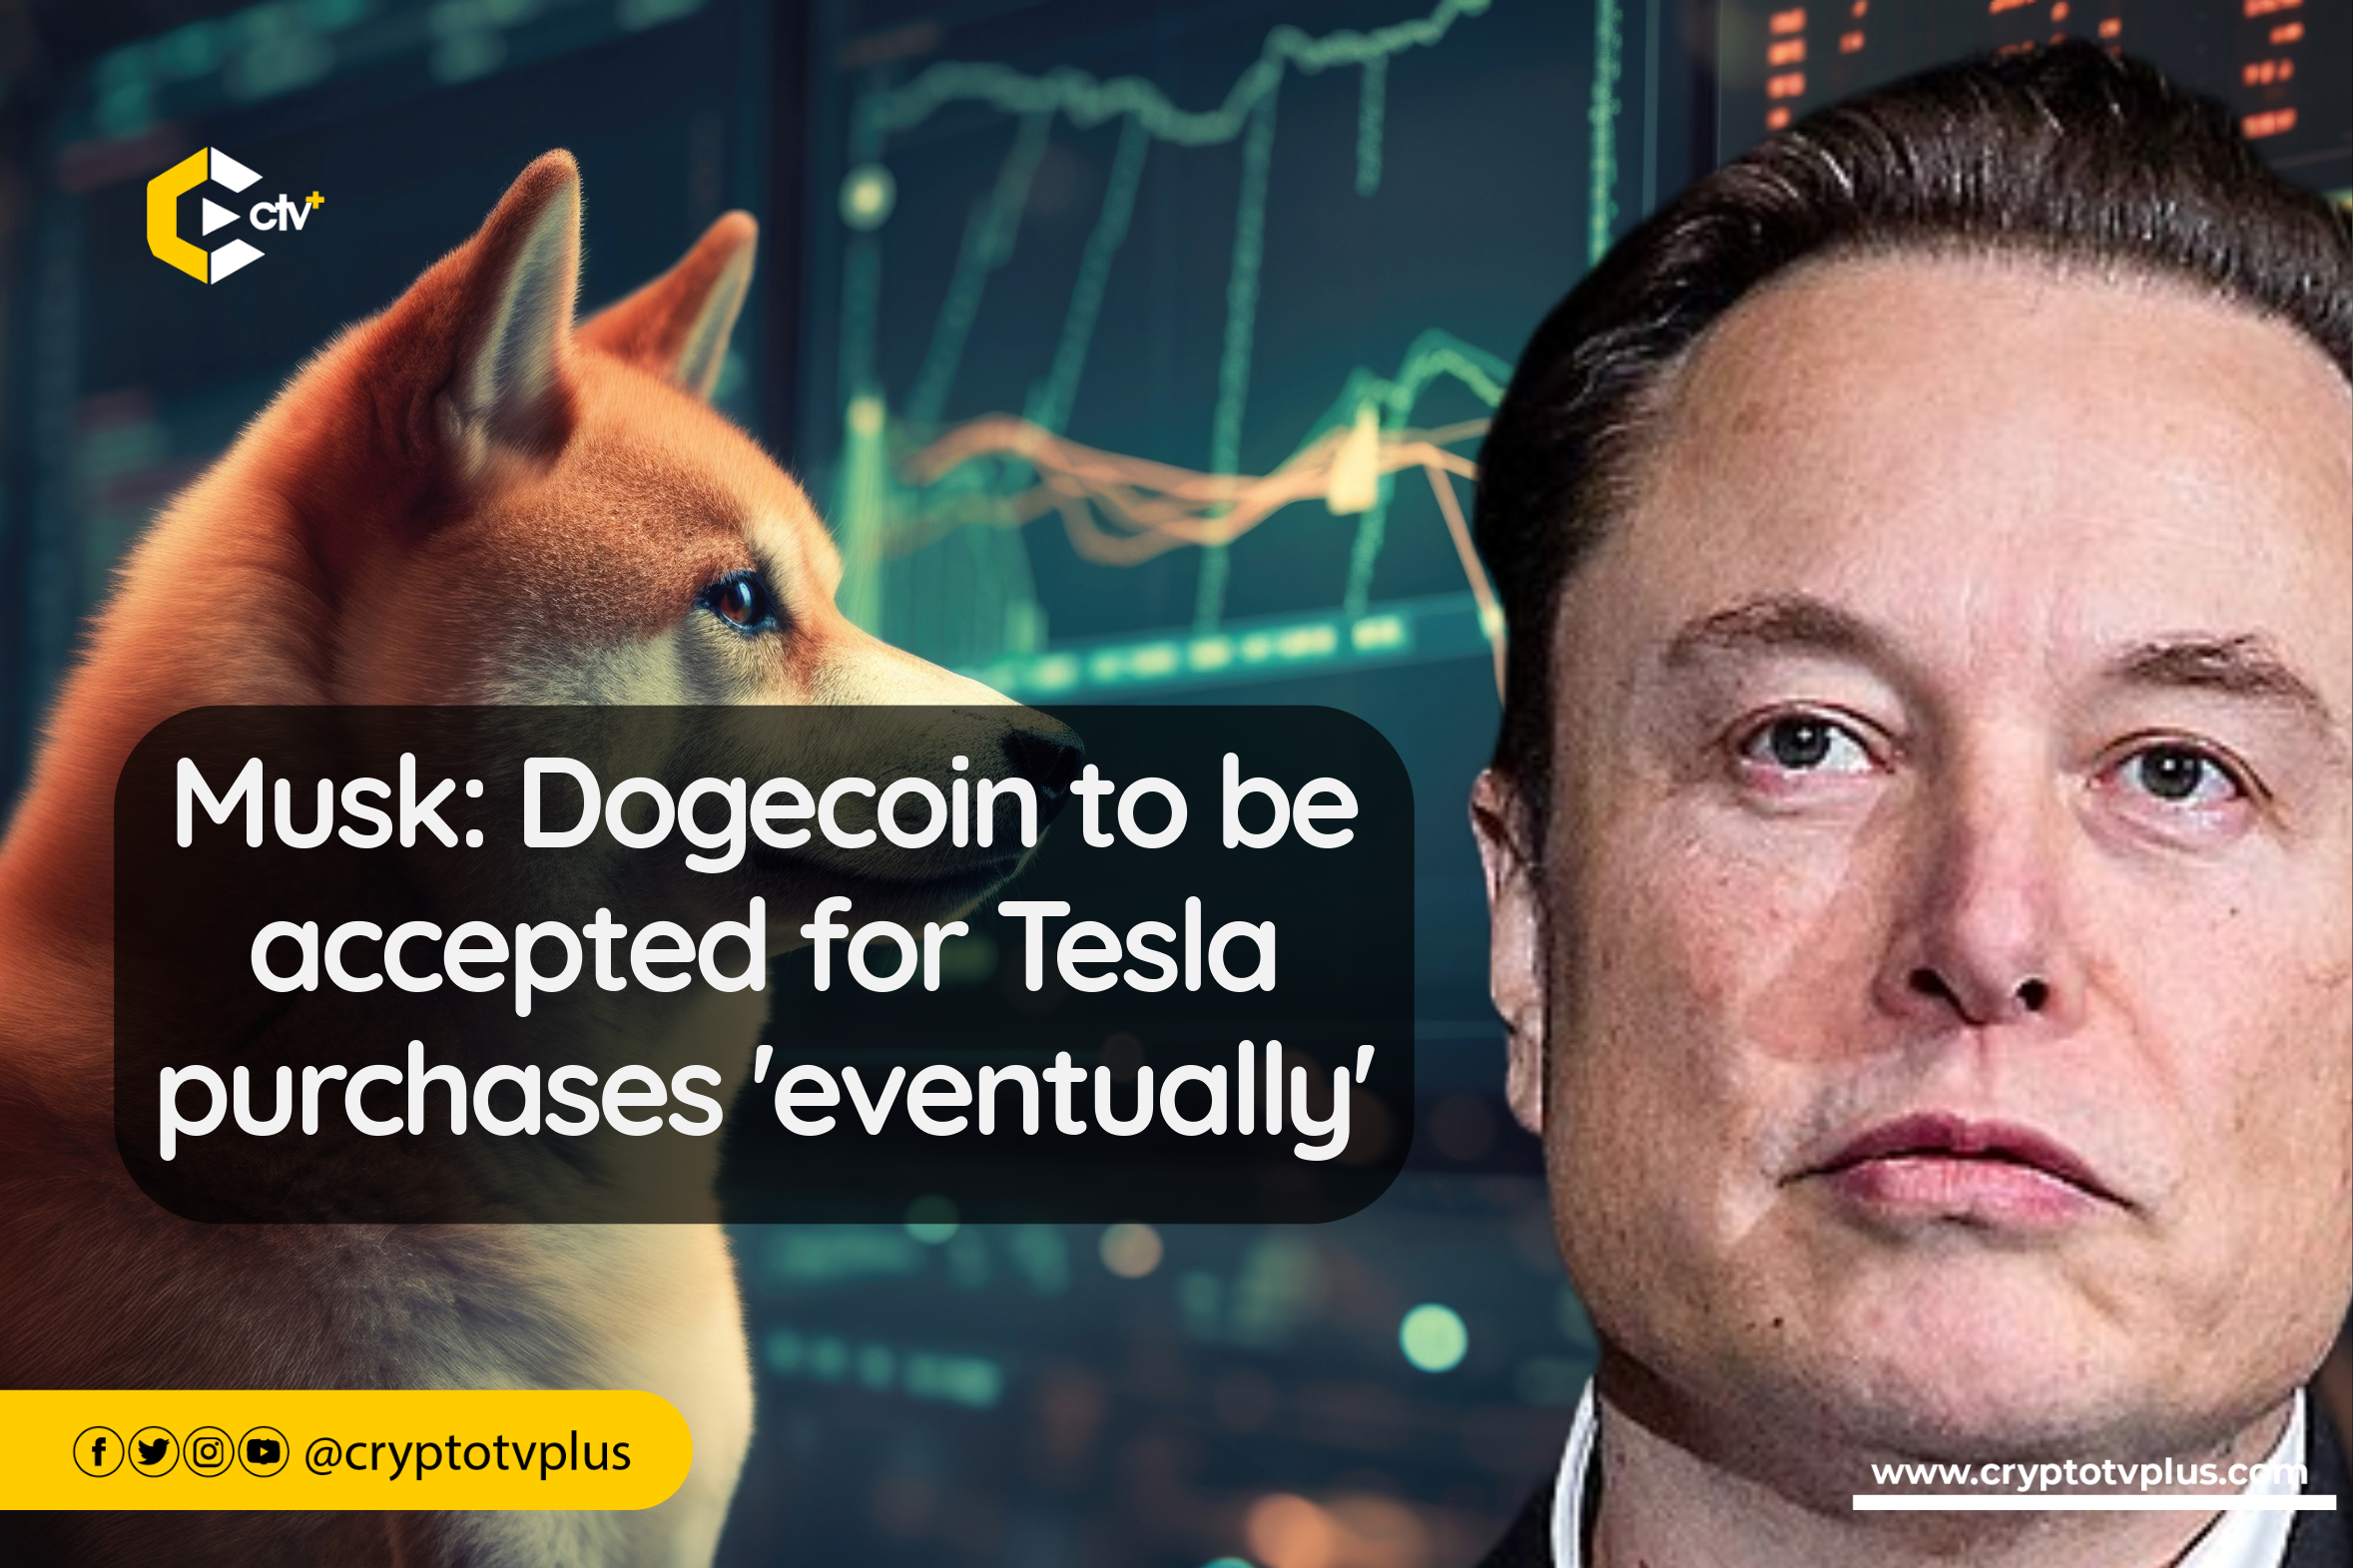 Elon Musk announced that Dogecoin will eventually be accepted as payment for Tesla purchases, marking a huge step in cryptocurrency adoption.